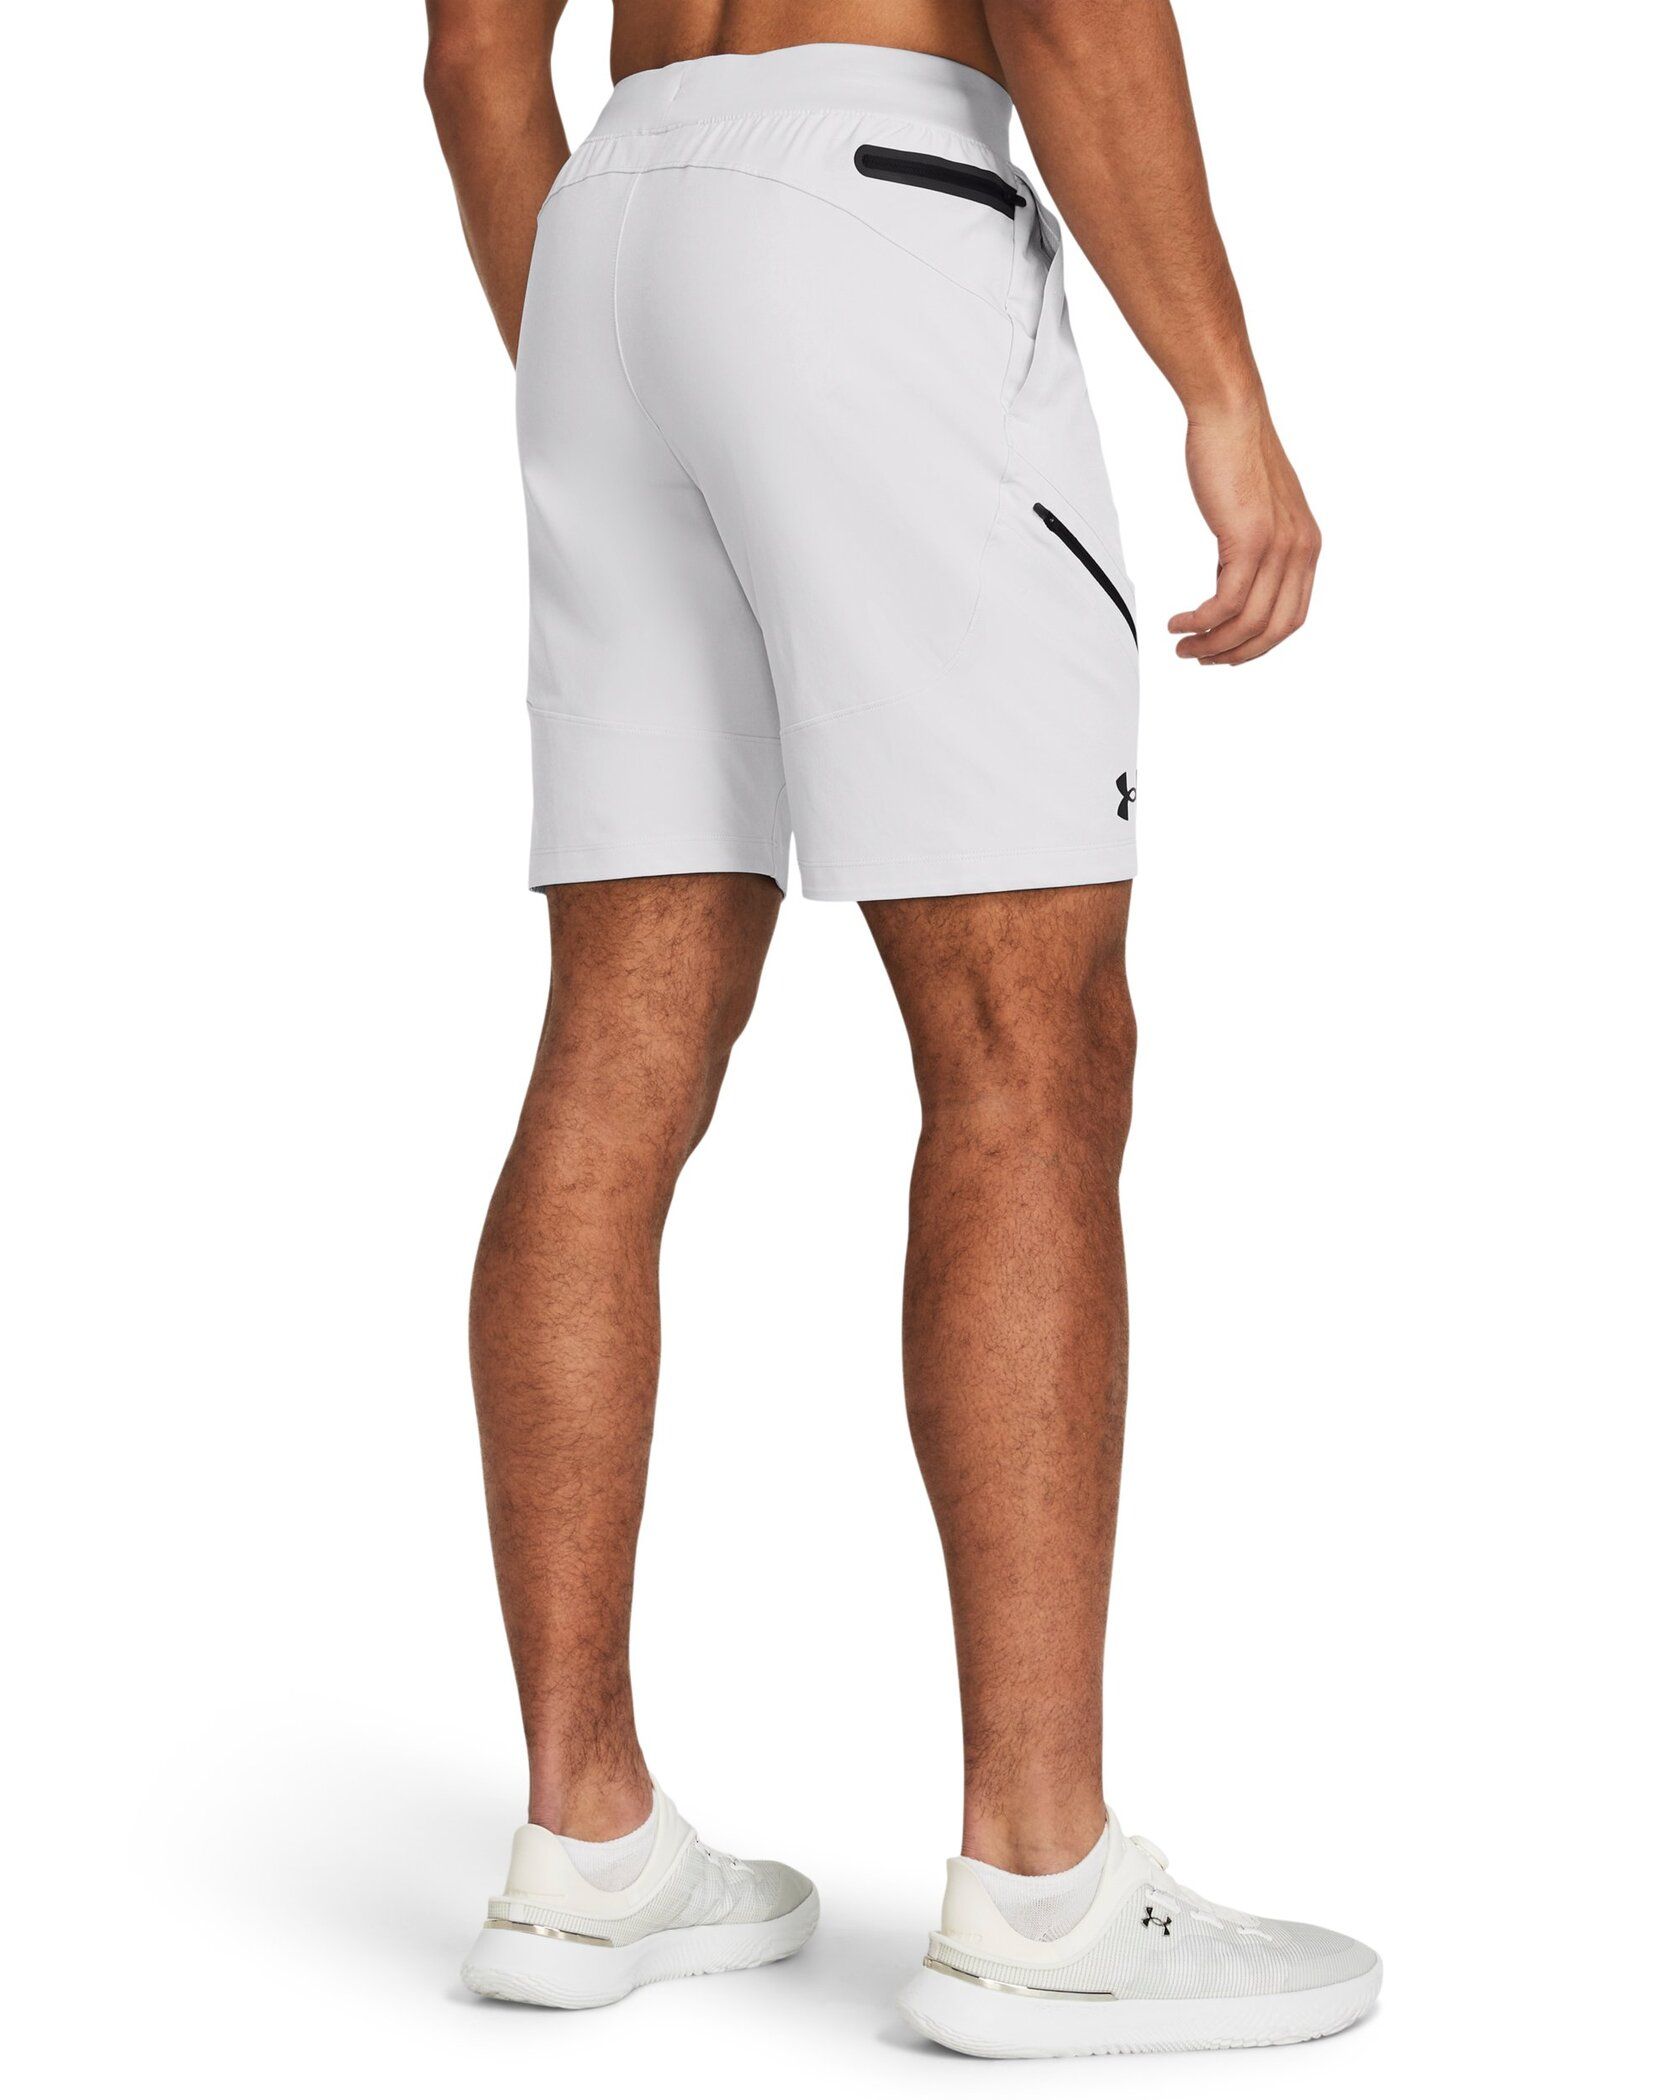 Under Armour, Armour Cargo Shorts Mens, Performance Shorts